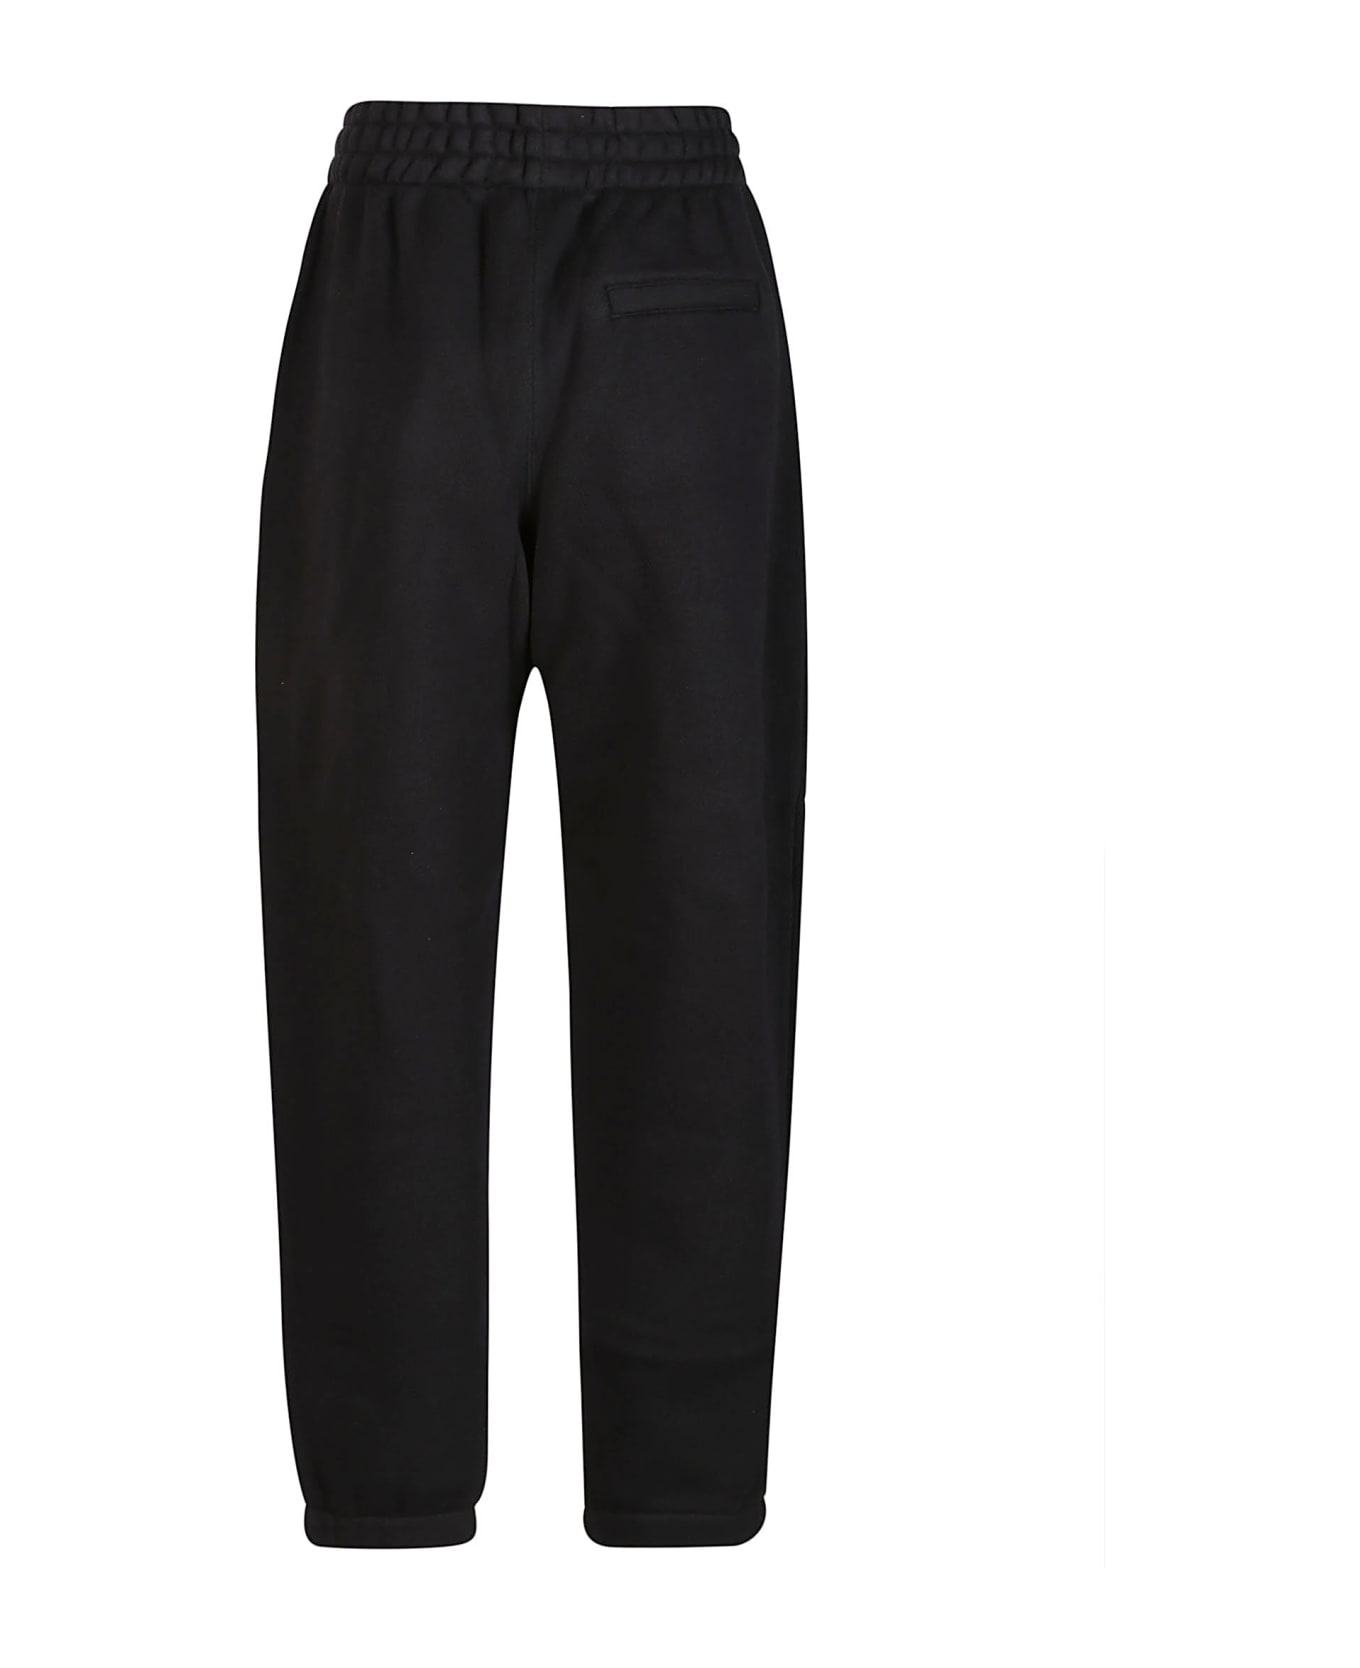 T by Alexander Wang Puff Paint Logo Esential Terry Classic Sweatpant - Black スウェットパンツ